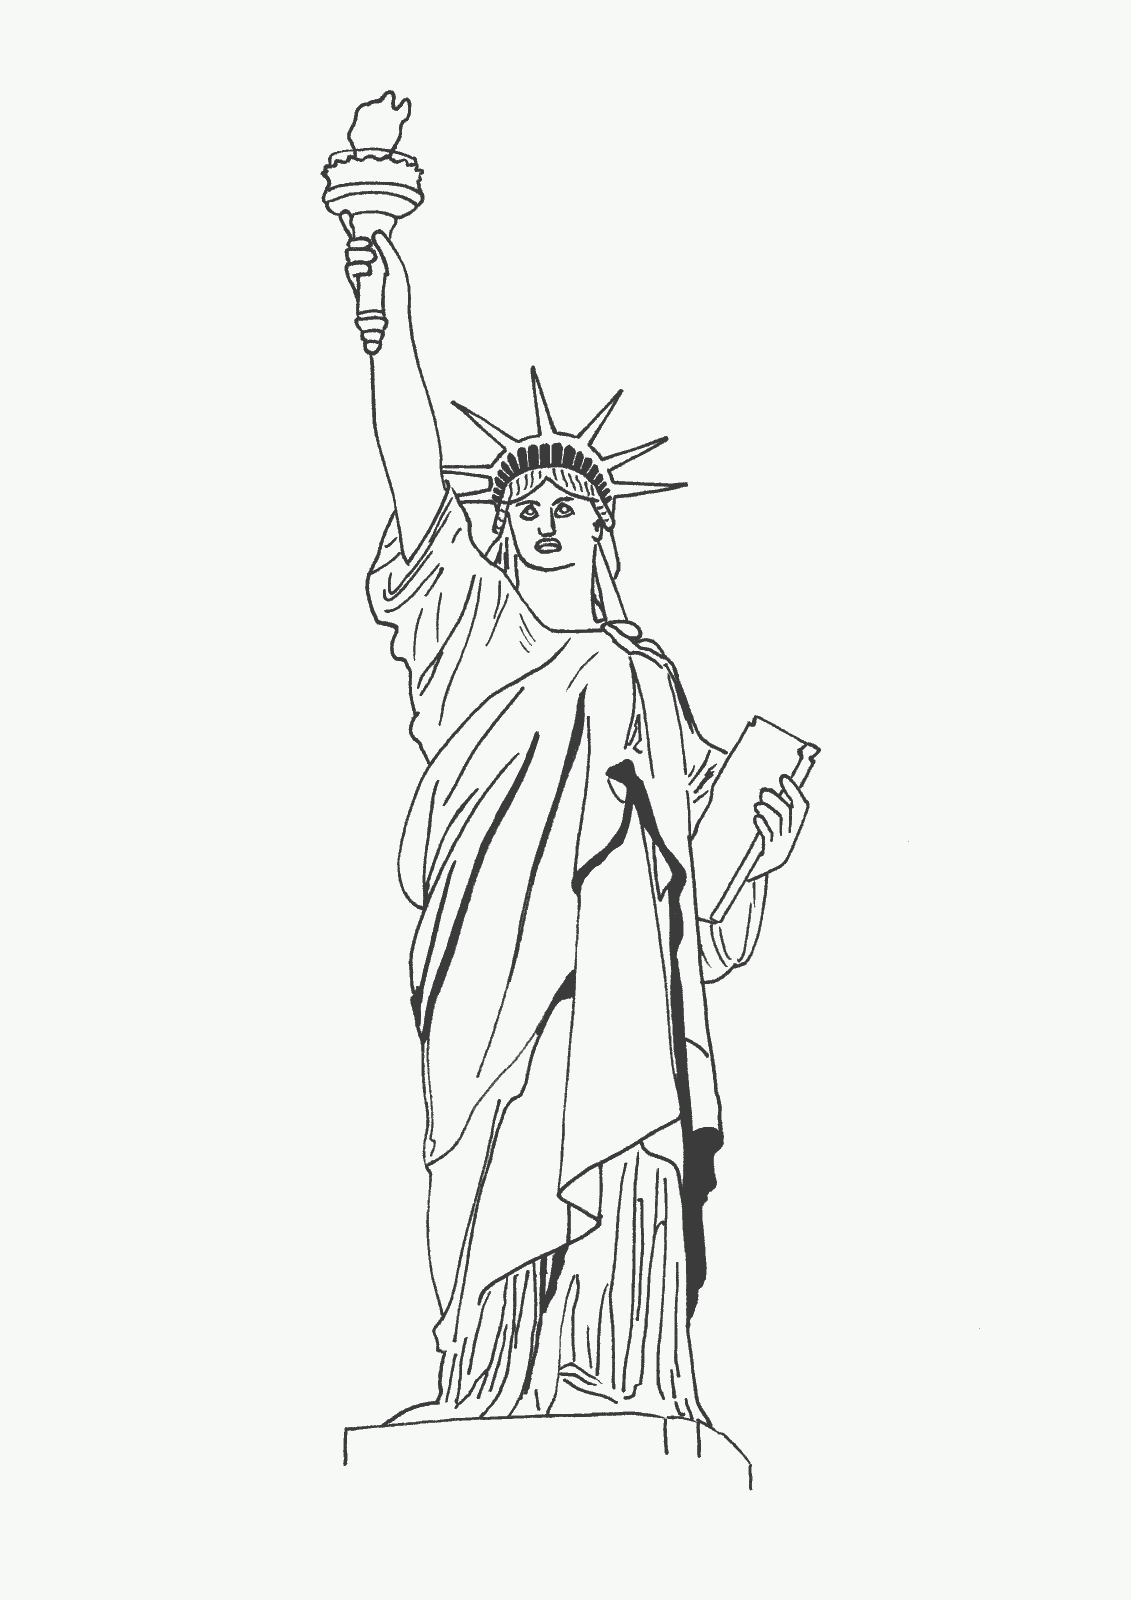 Easy Statue Of Liberty Drawings wallpapers - High quality mobile 